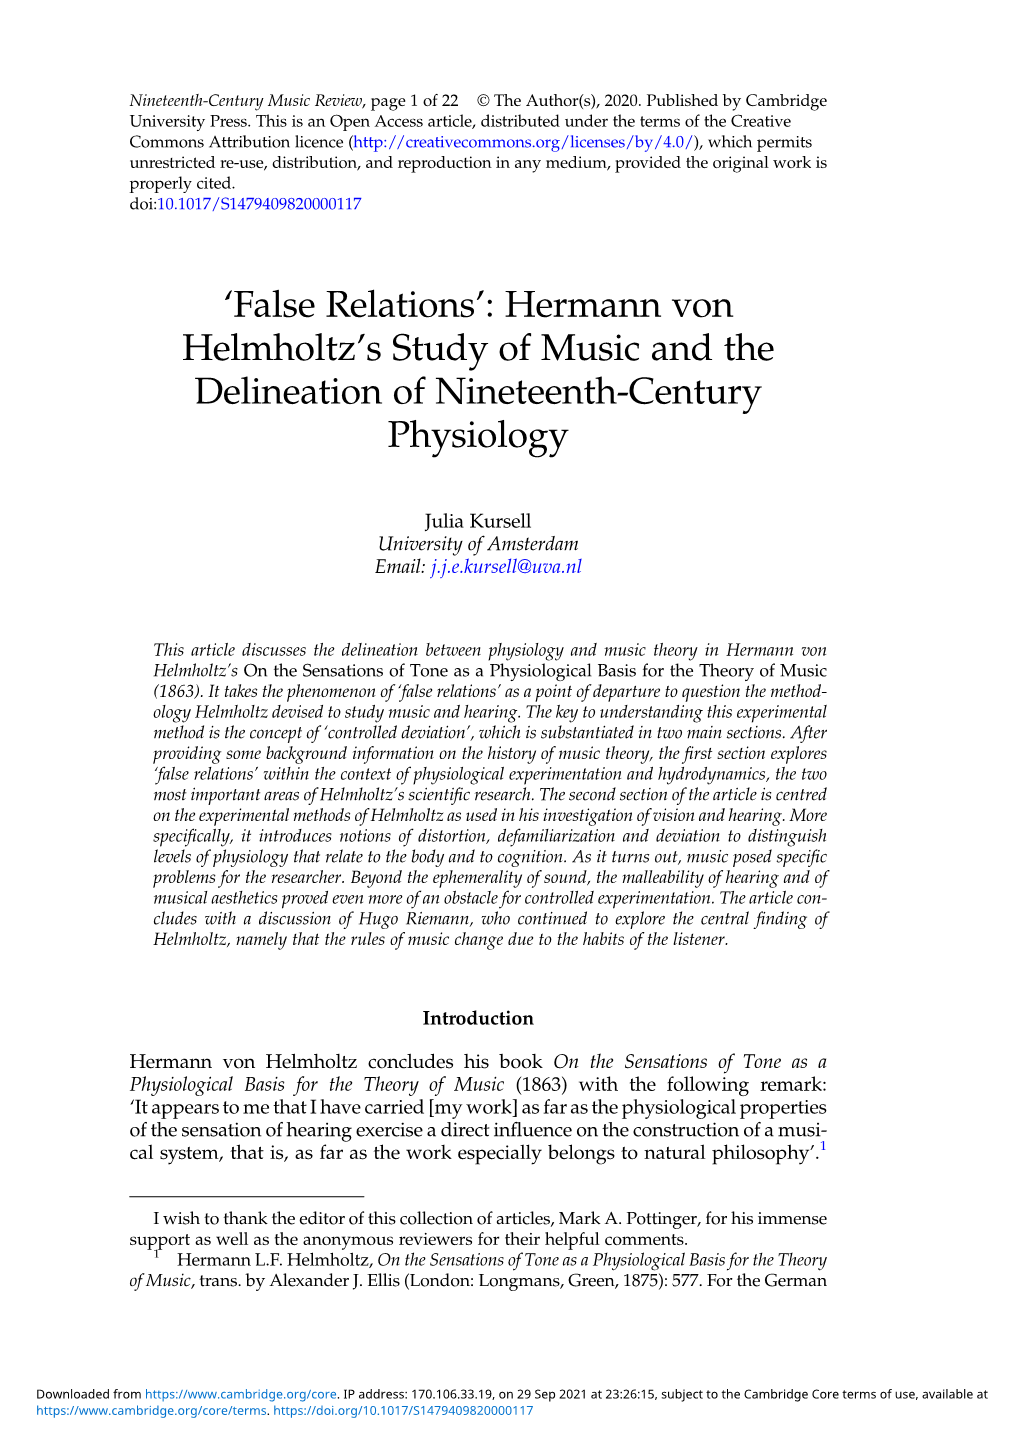 'False Relations': Hermann Von Helmholtz's Study of Music and The